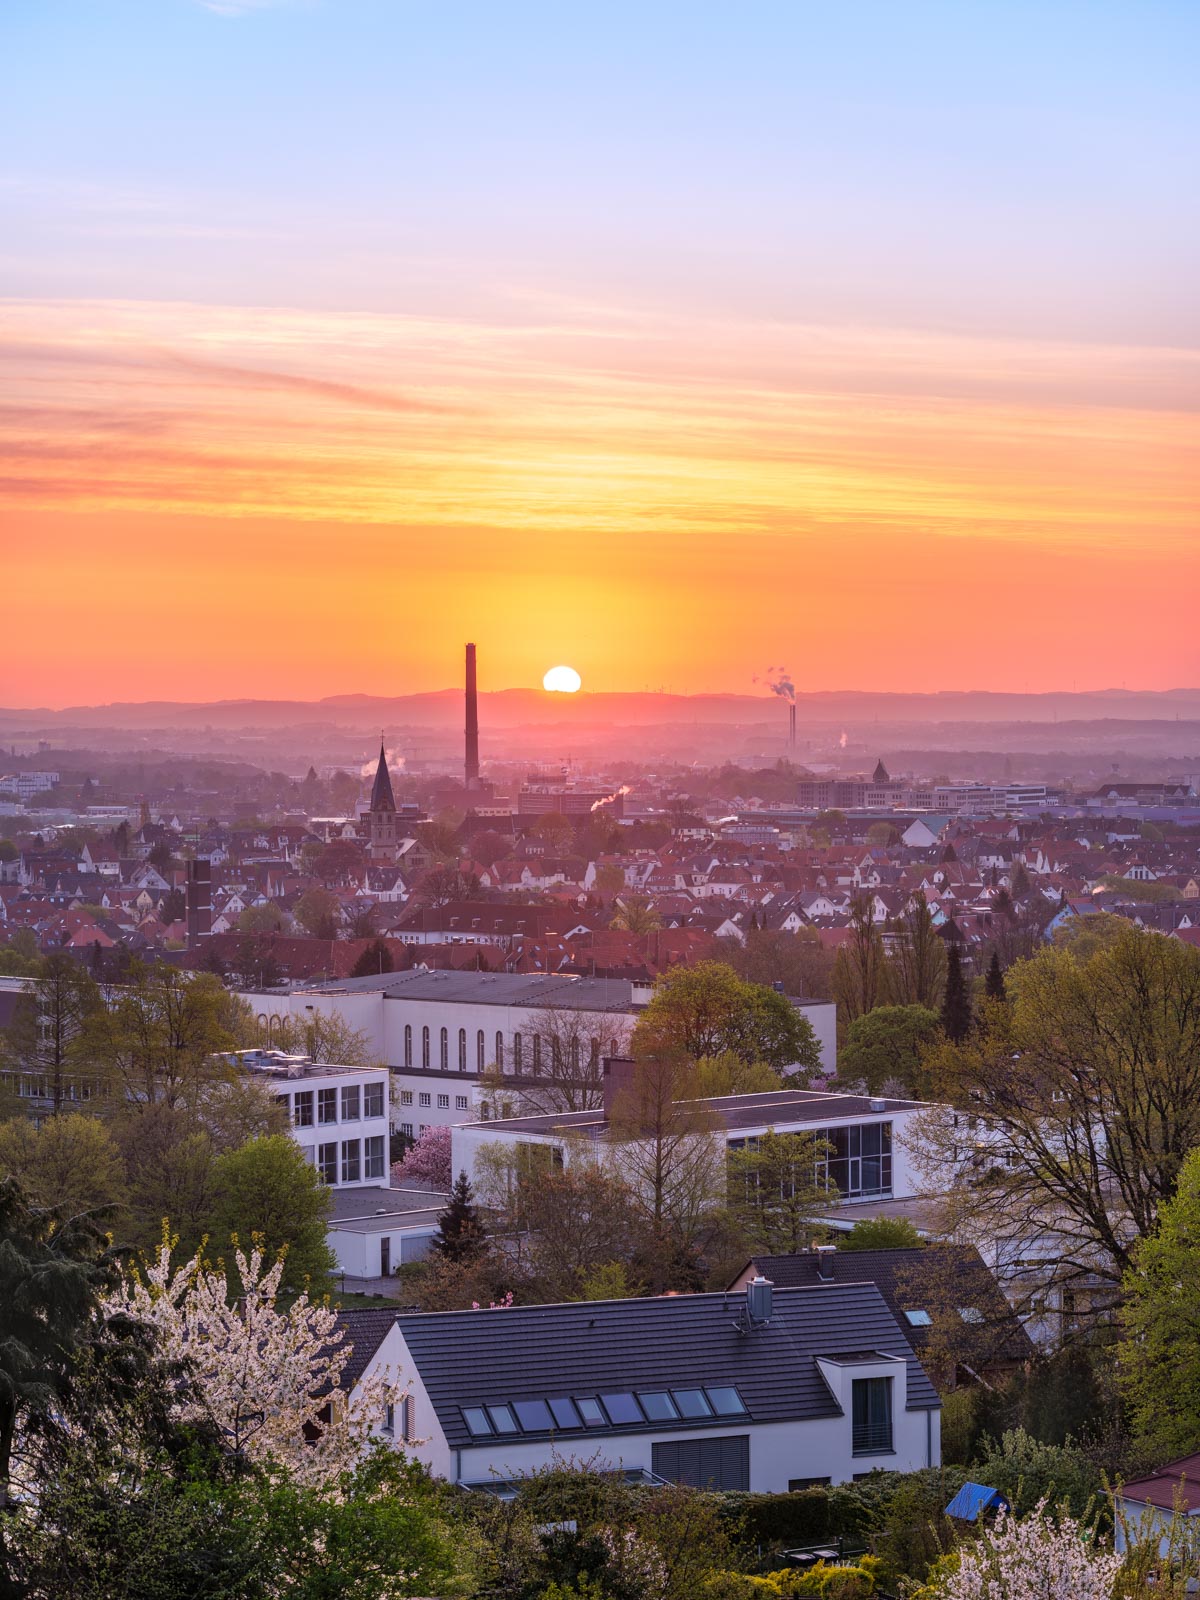 Sunrise in the west of Bielefeld (Germany).